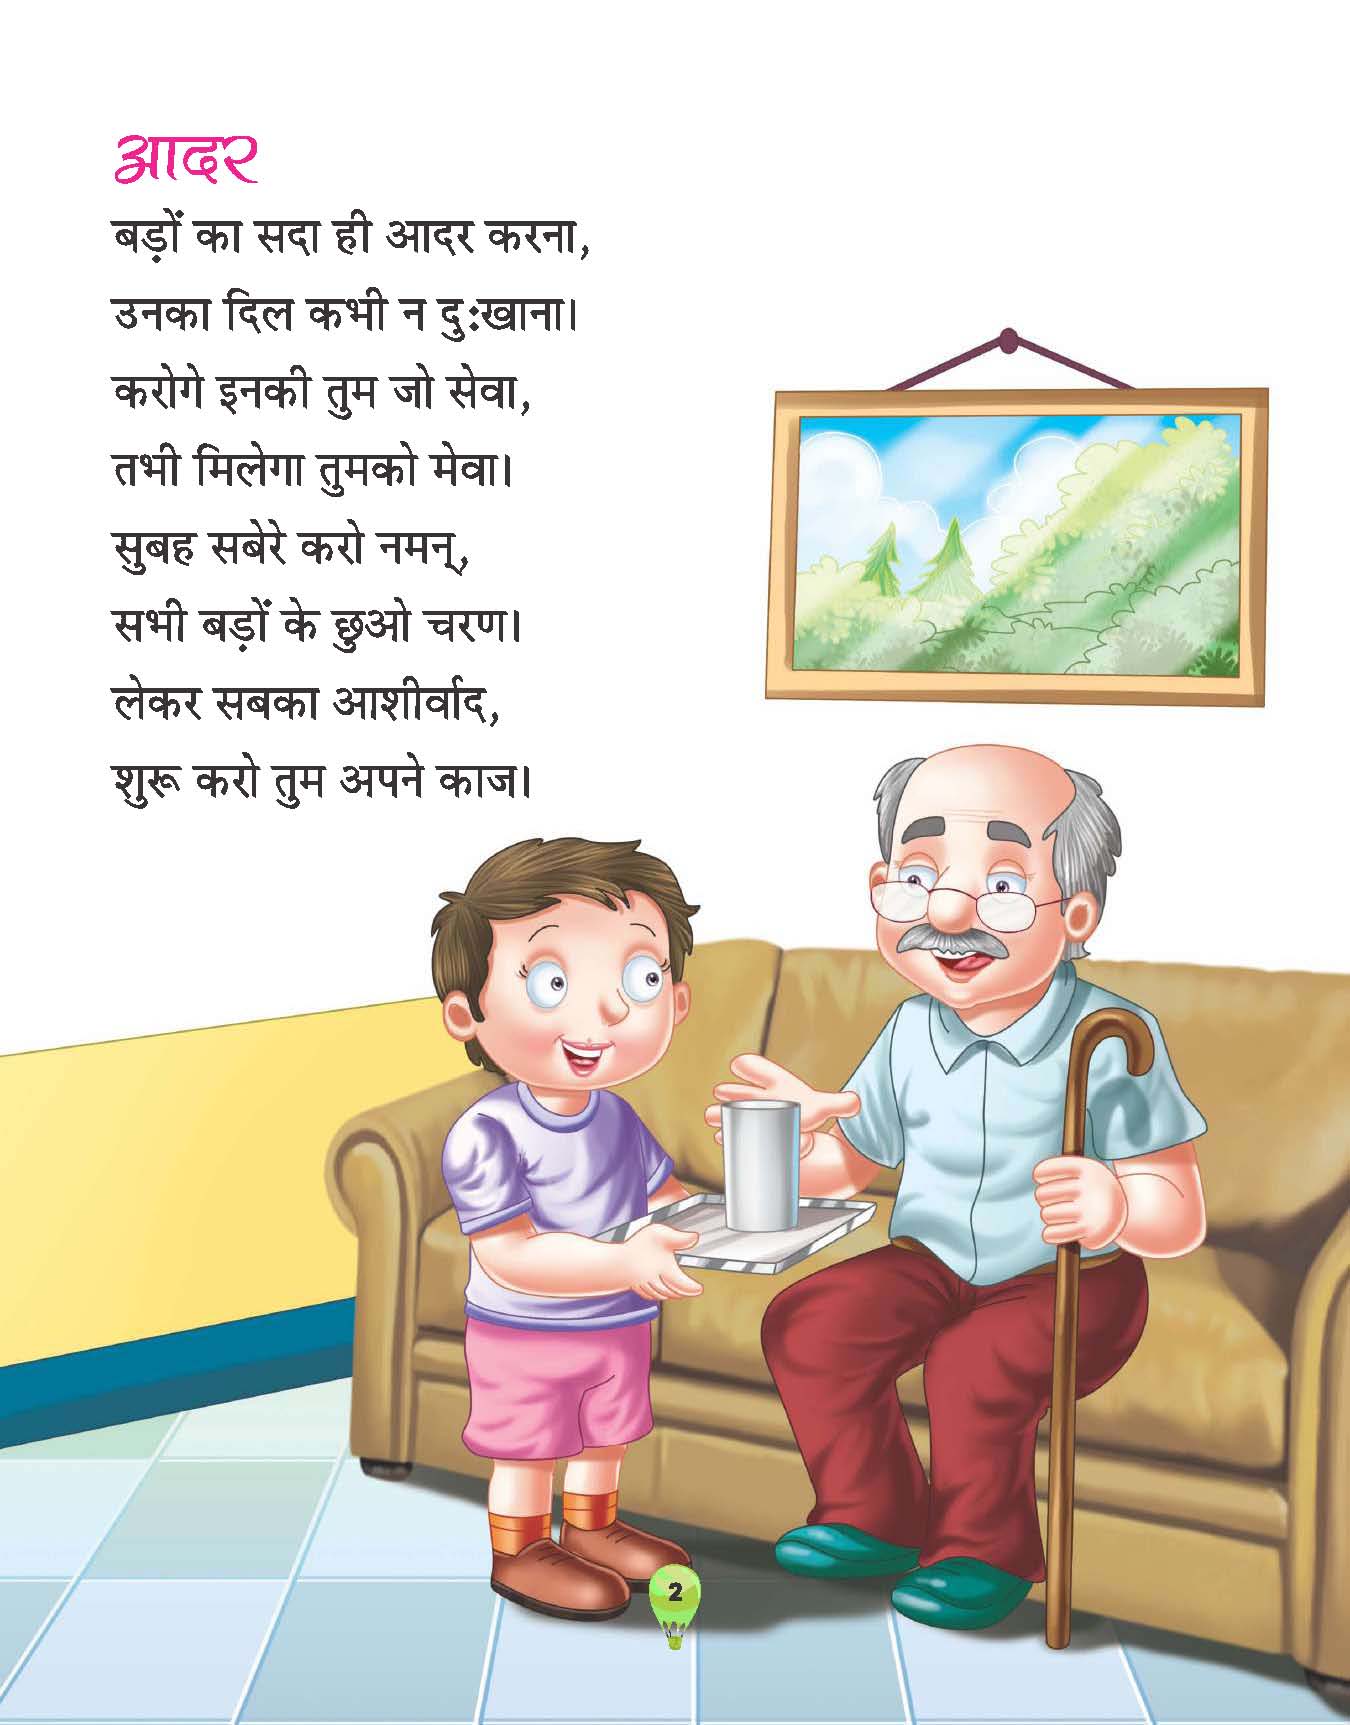 poems for kids in hindi